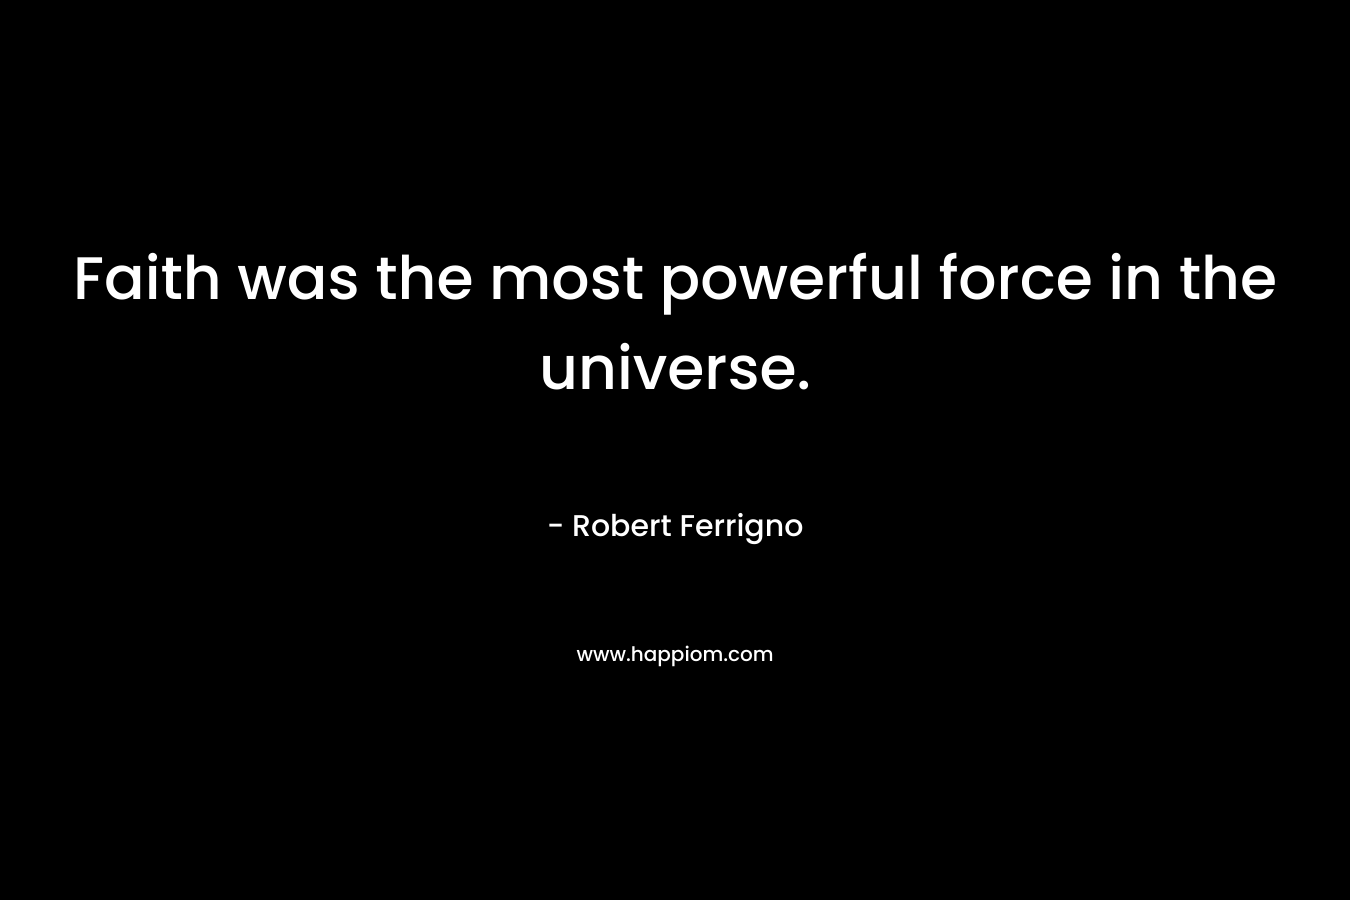 Faith was the most powerful force in the universe.